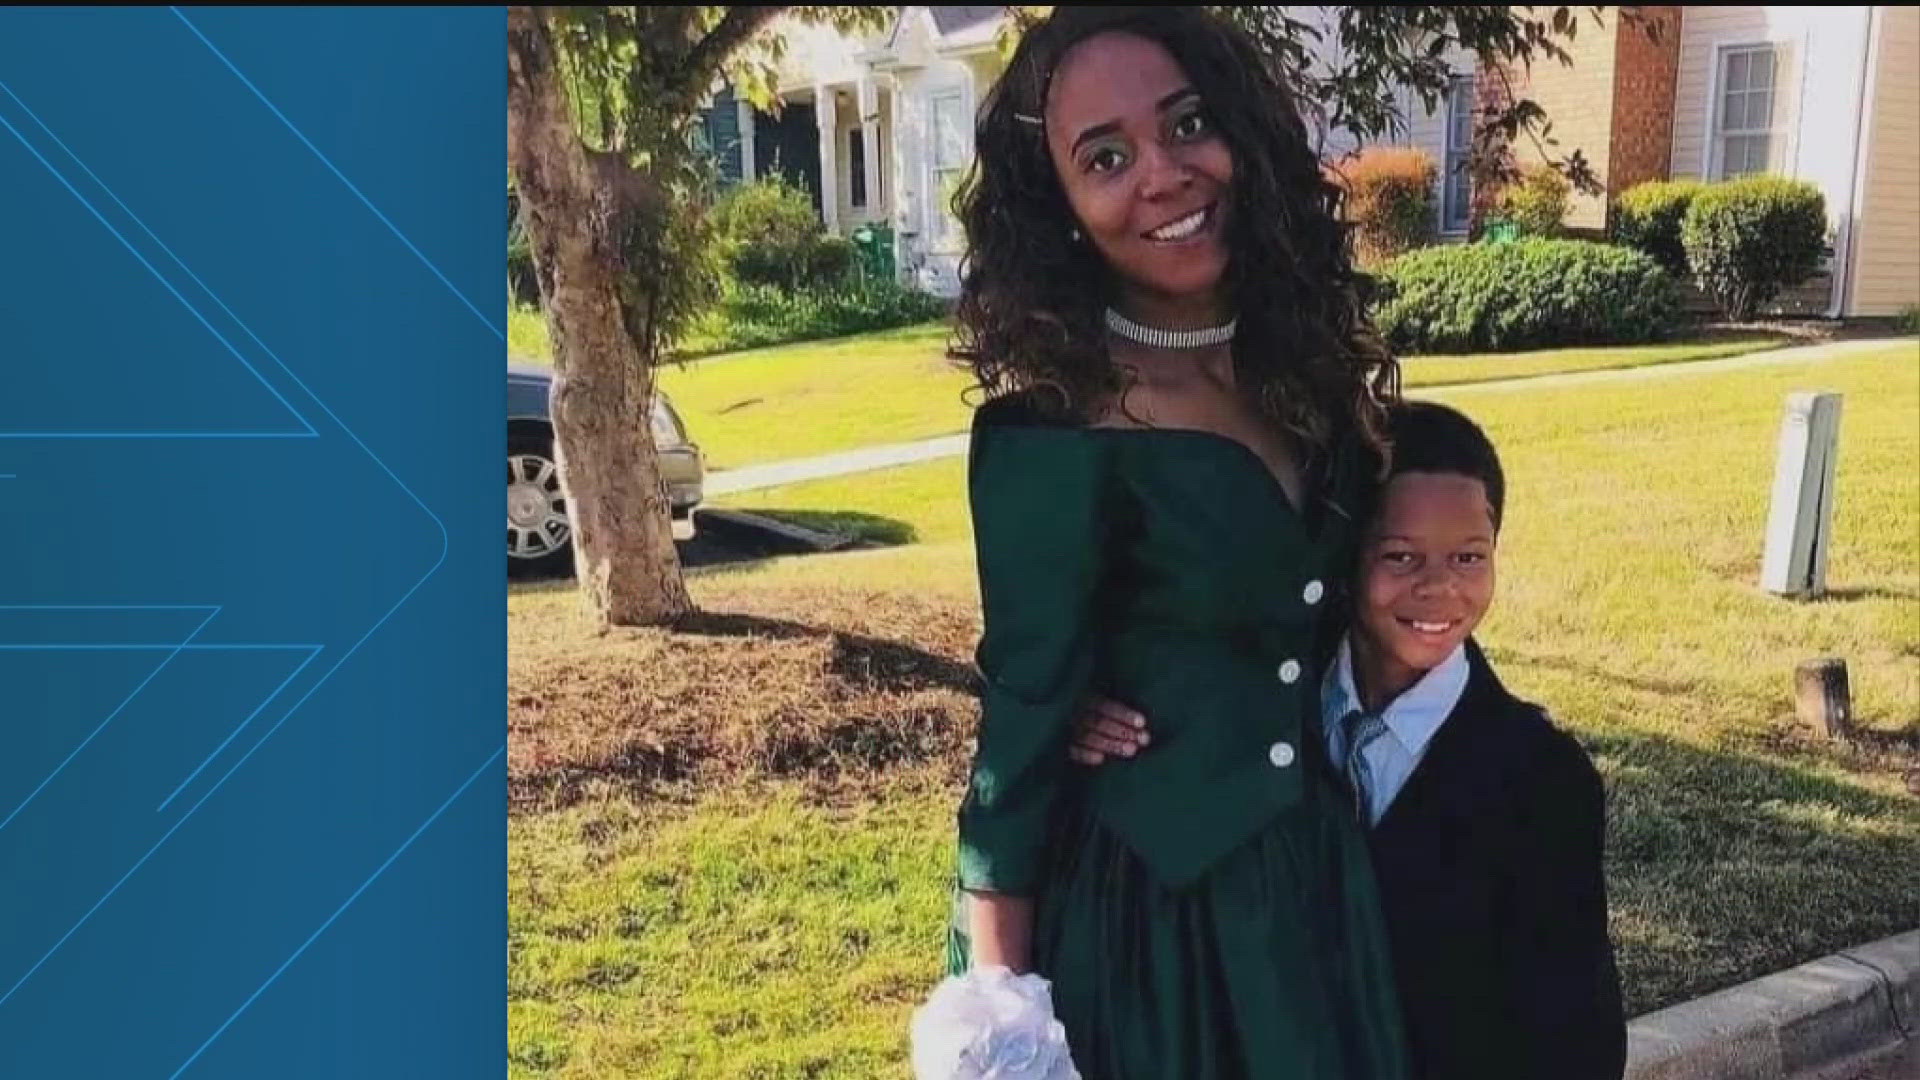 Chanell Crosby's death comes just two years after her teenage son, Jamiren Crosby, and her brother, Darrio "Polo" Giles, were both found shot and killed.